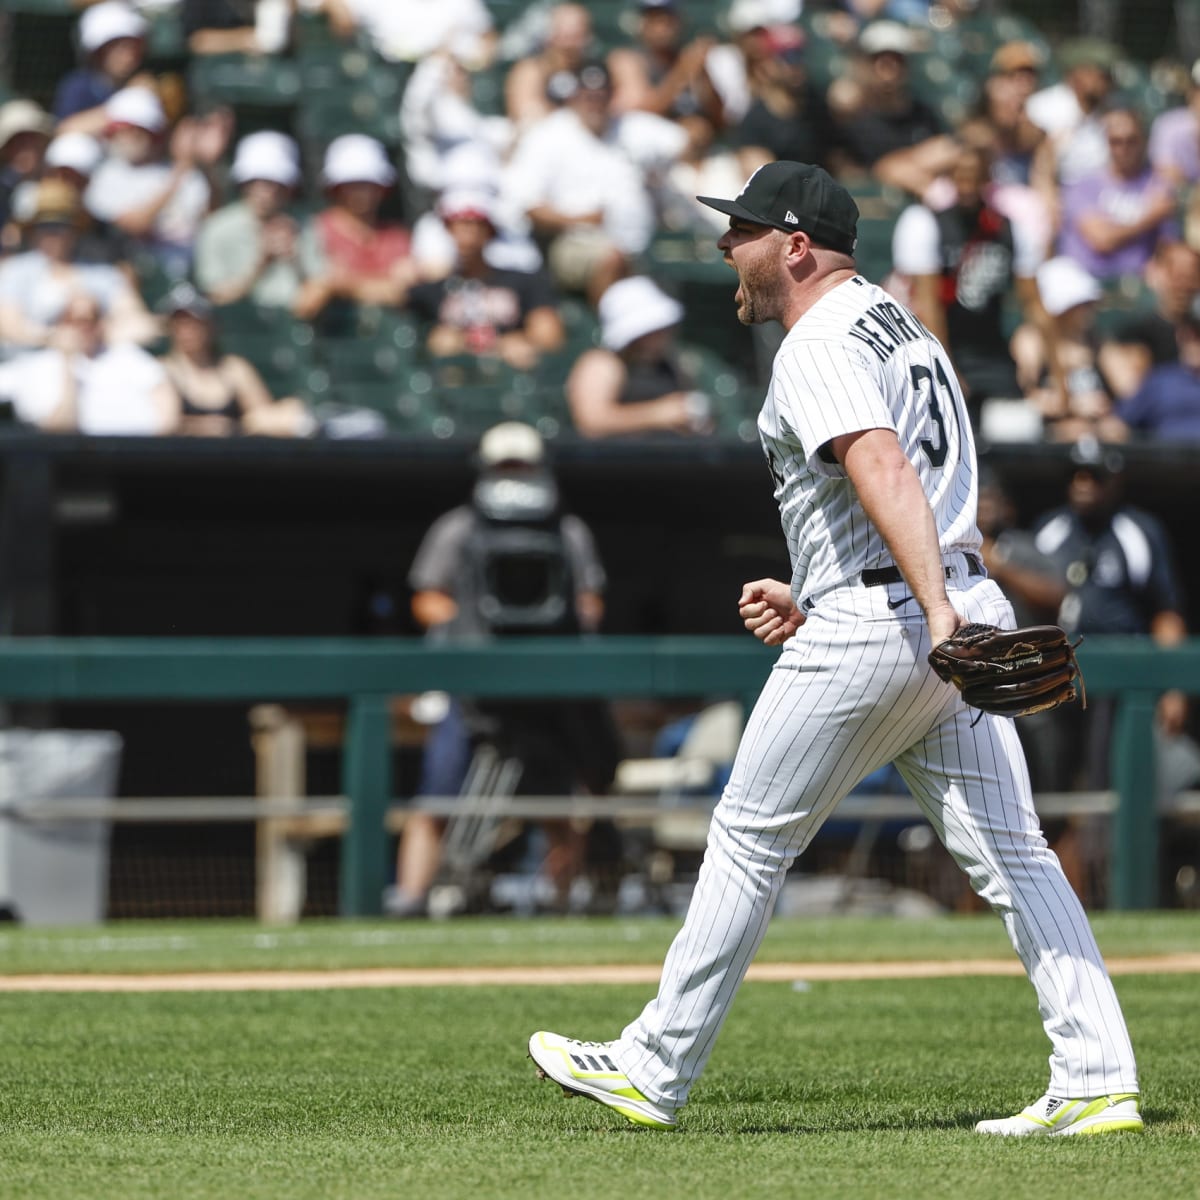 White Sox Player Liam Hendriks Diagnosed with Non-Hodgkin's Lymphoma